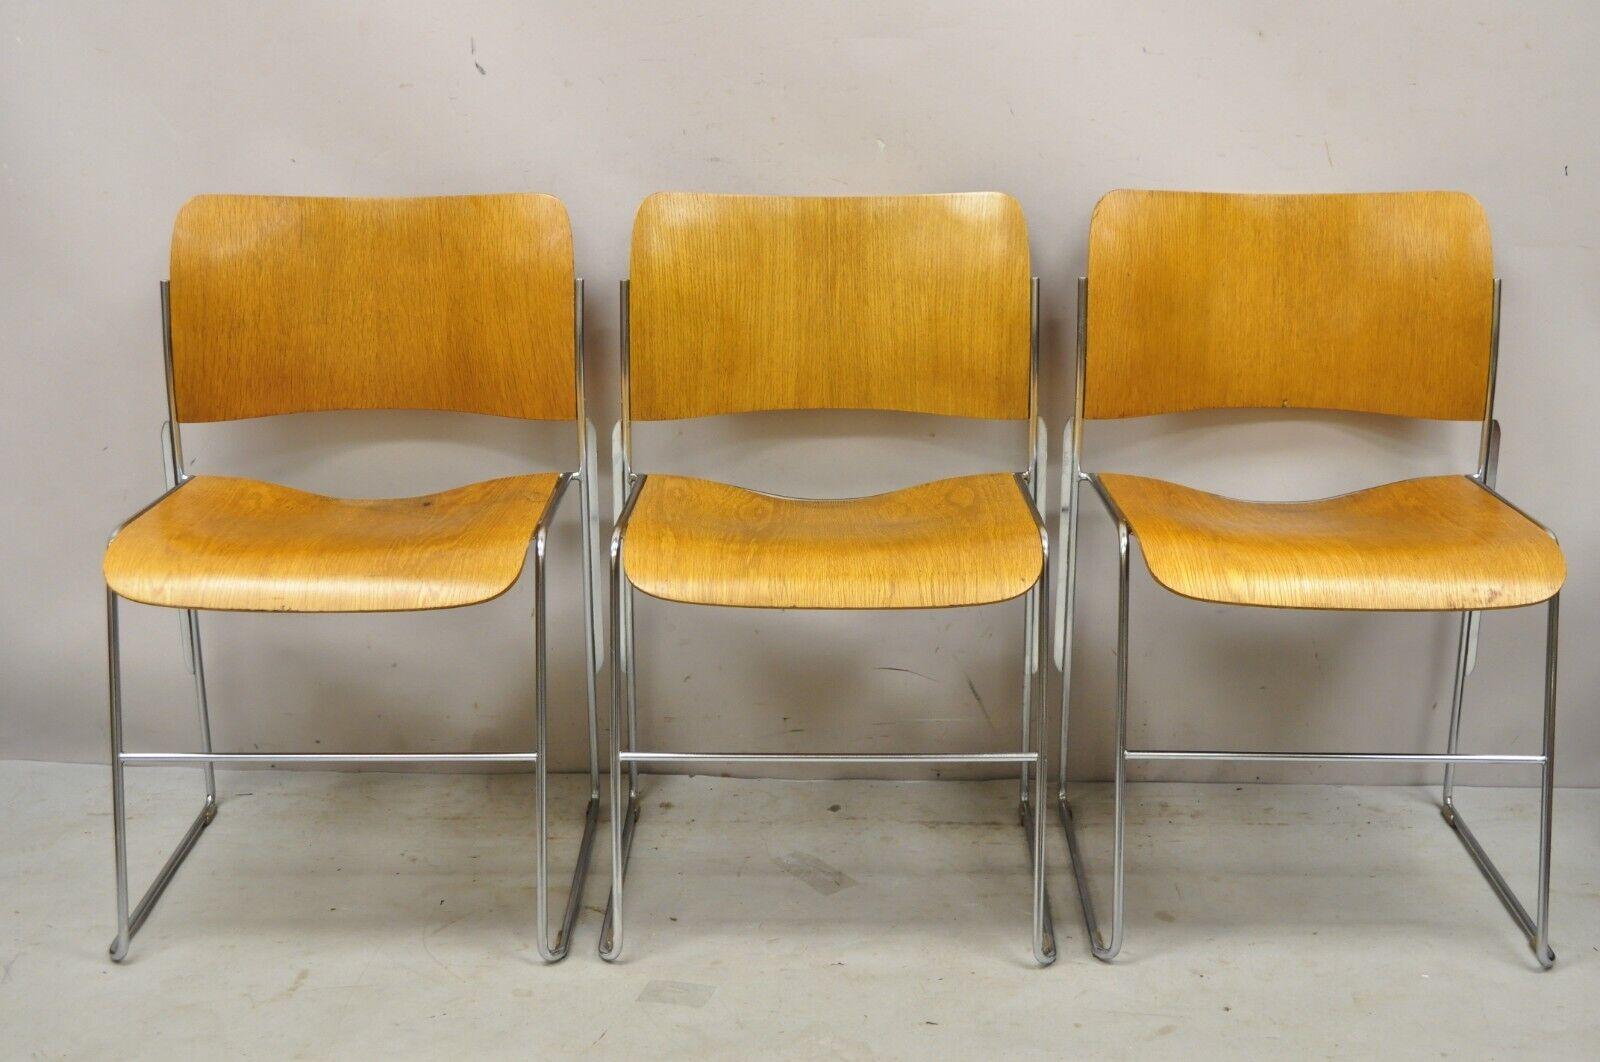 David Rowland 40/4 bentwood chrome frame stacking side chairs - set of 3. Item features bentwood back and seats, chrome metal frames, stacking form, (3) side chairs, original labels. circa 1970s. Measurements: 30